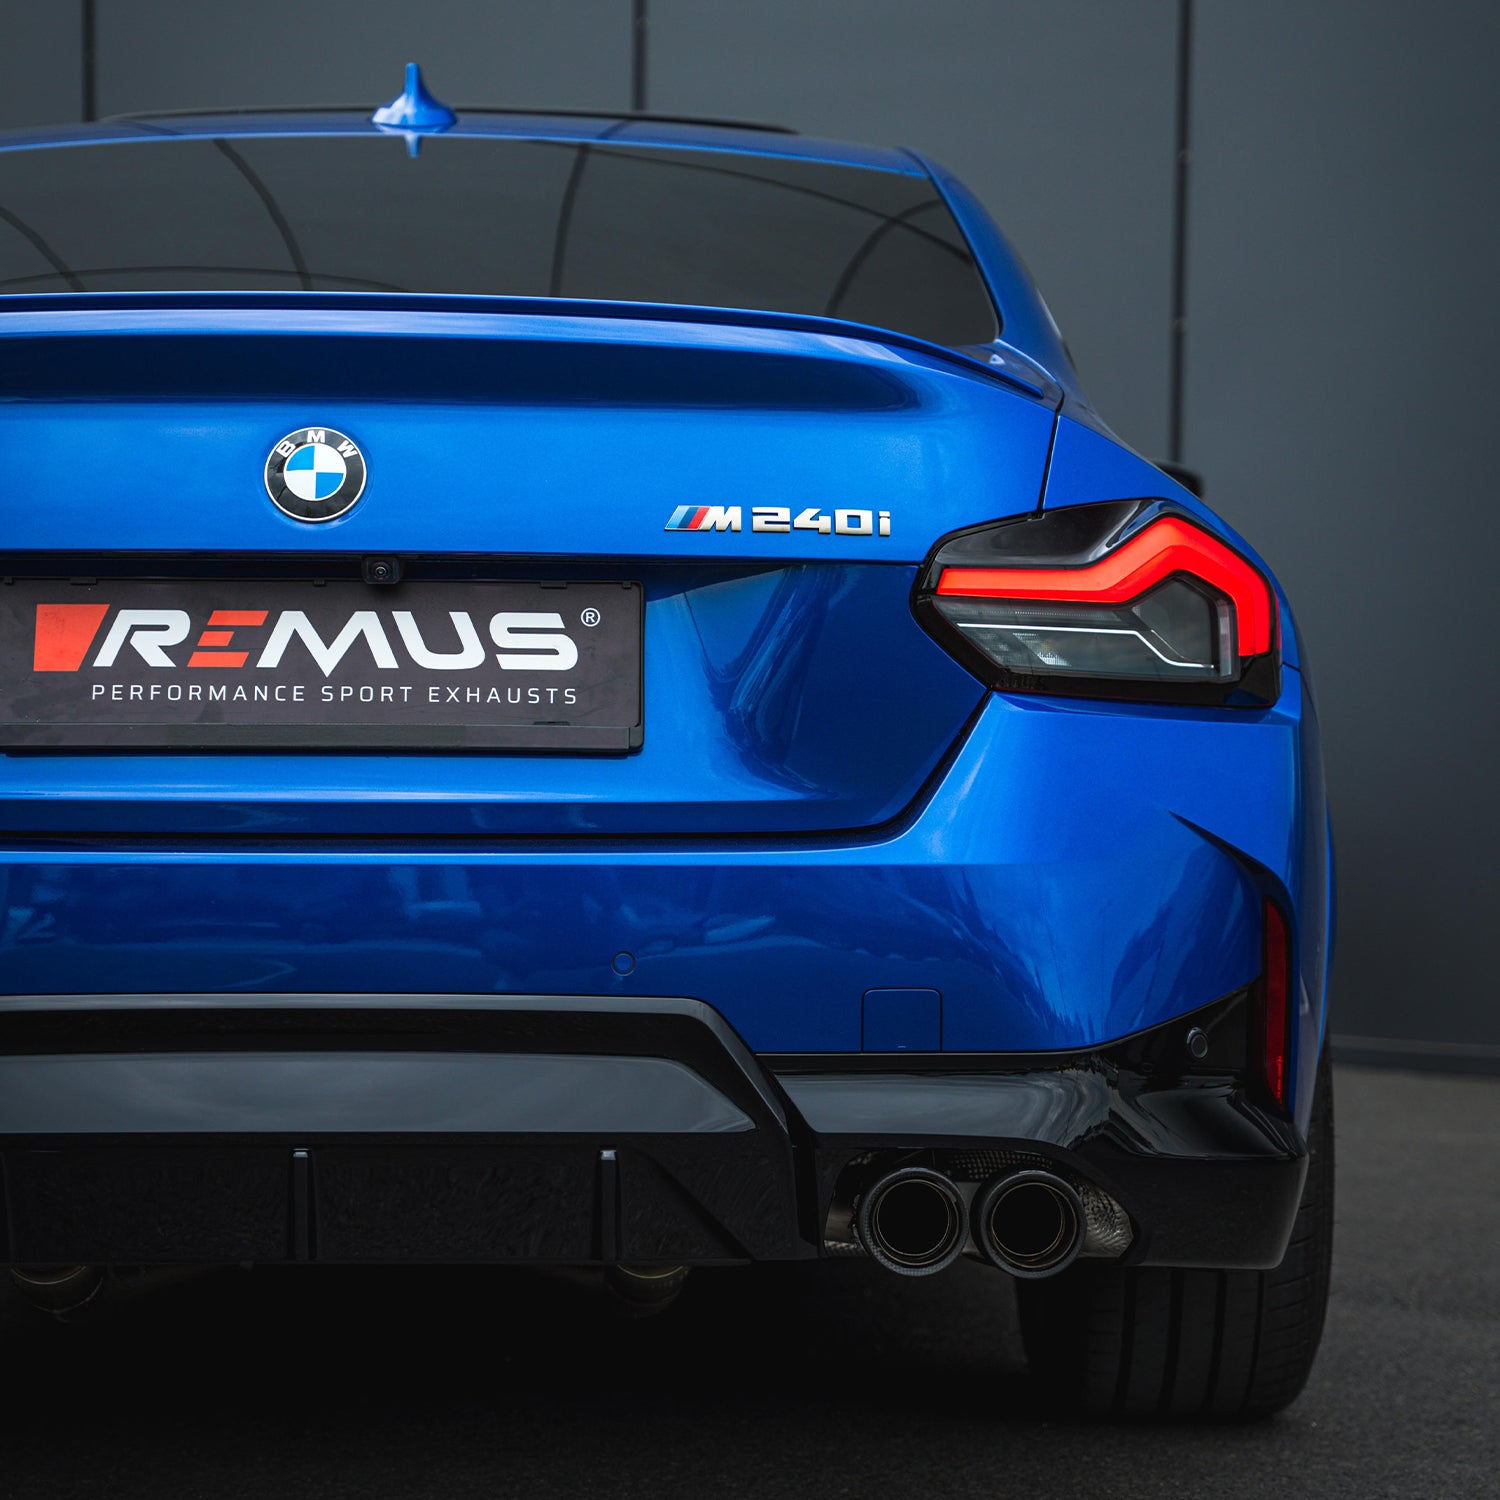 Remus Exhausts BMW G42 M240i Axle Back Exhaust System Fitted On Car